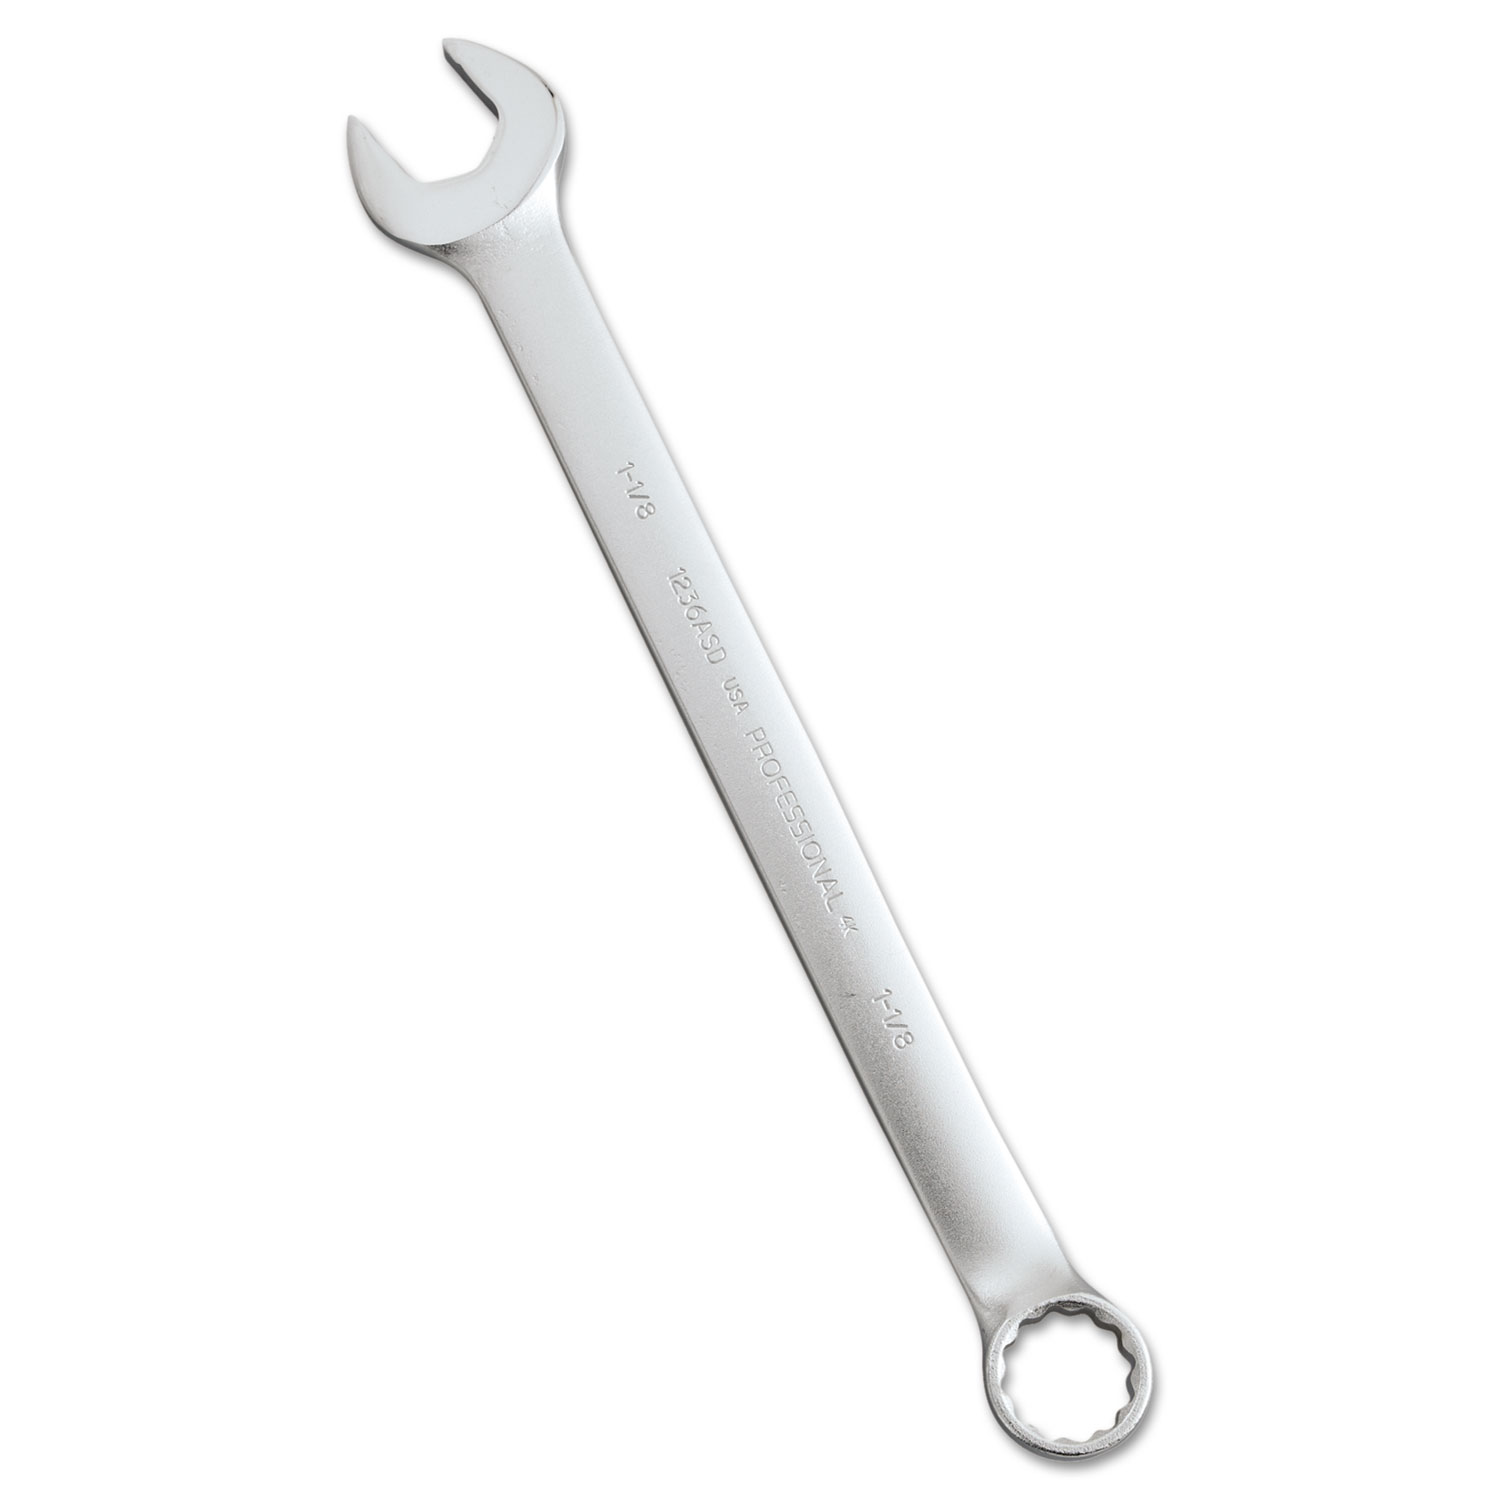 PROTO Combination Wrench, 15 7/8 Long, 1 1/8 Opening, 12-Point Box